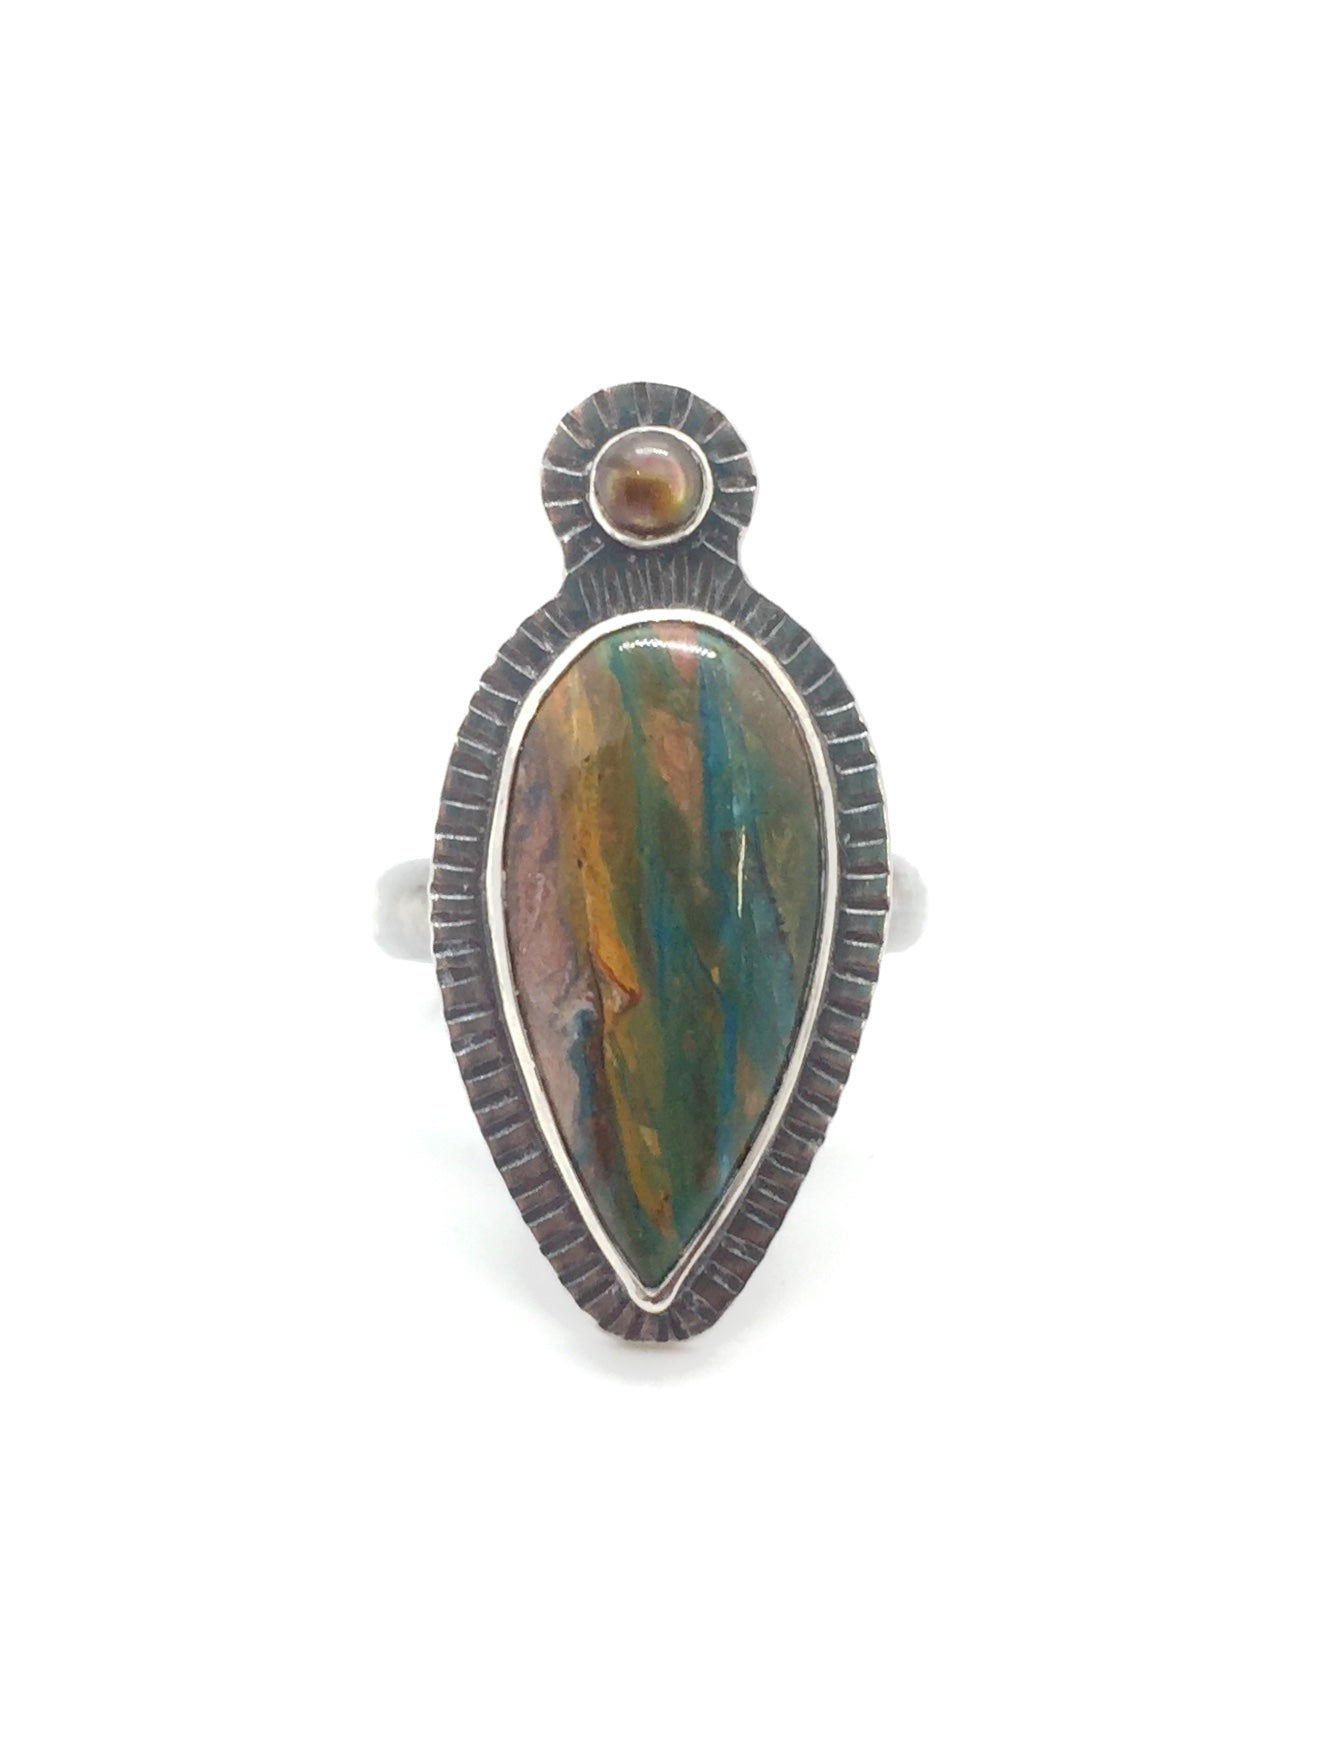 Peruvian Opal and Abalone Ring in Sterling Silver, Size 9